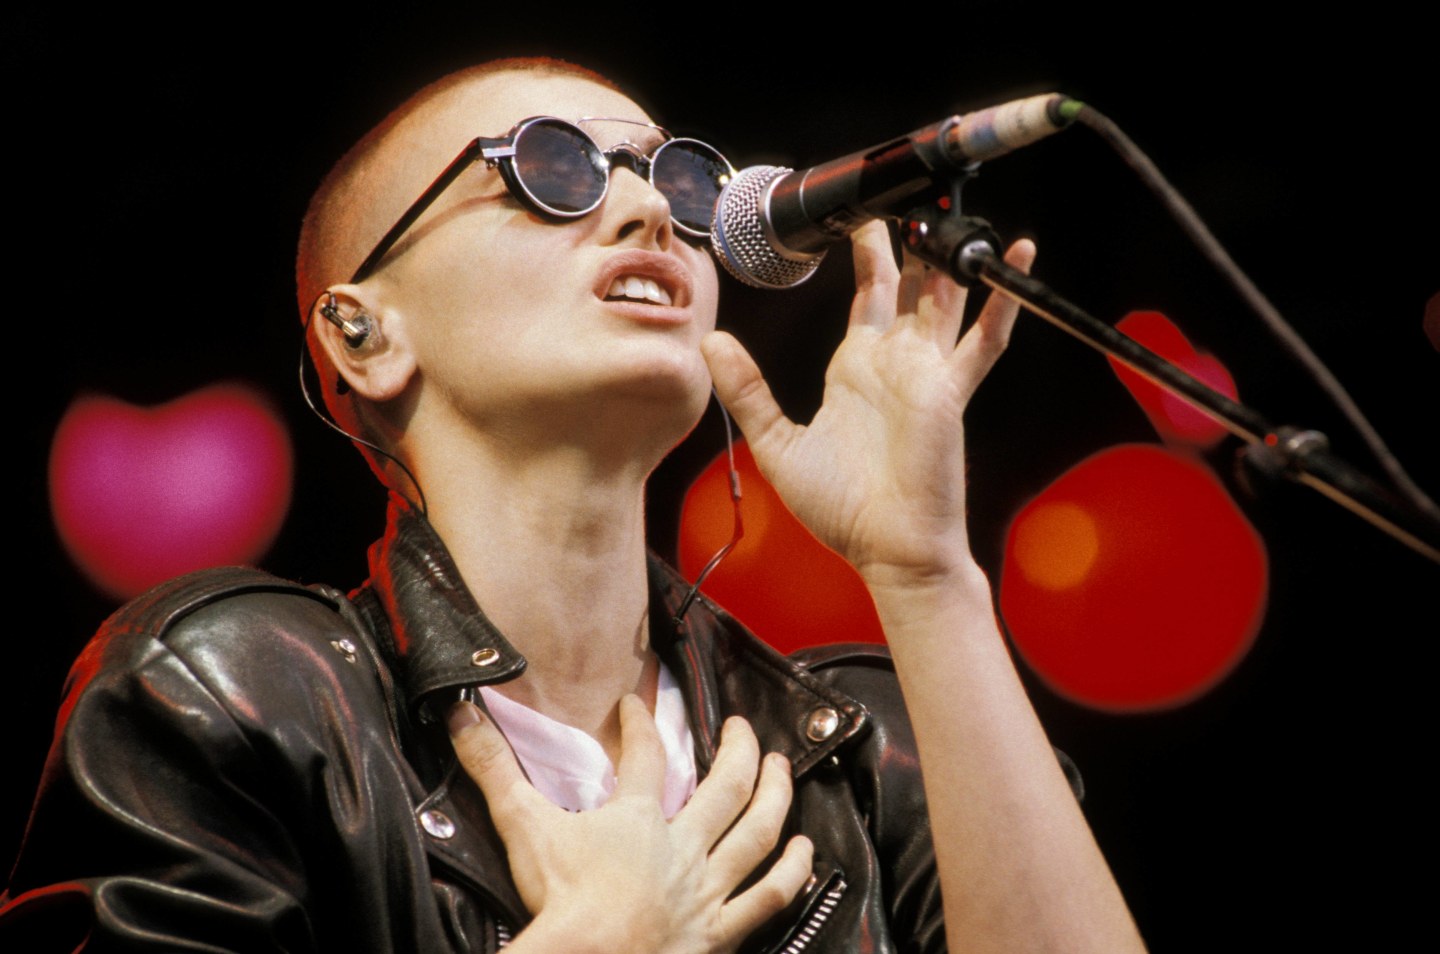 Live News: Sinéad O’Connor estate tells Trump to stop using her music, James Blake talks A.I., and more